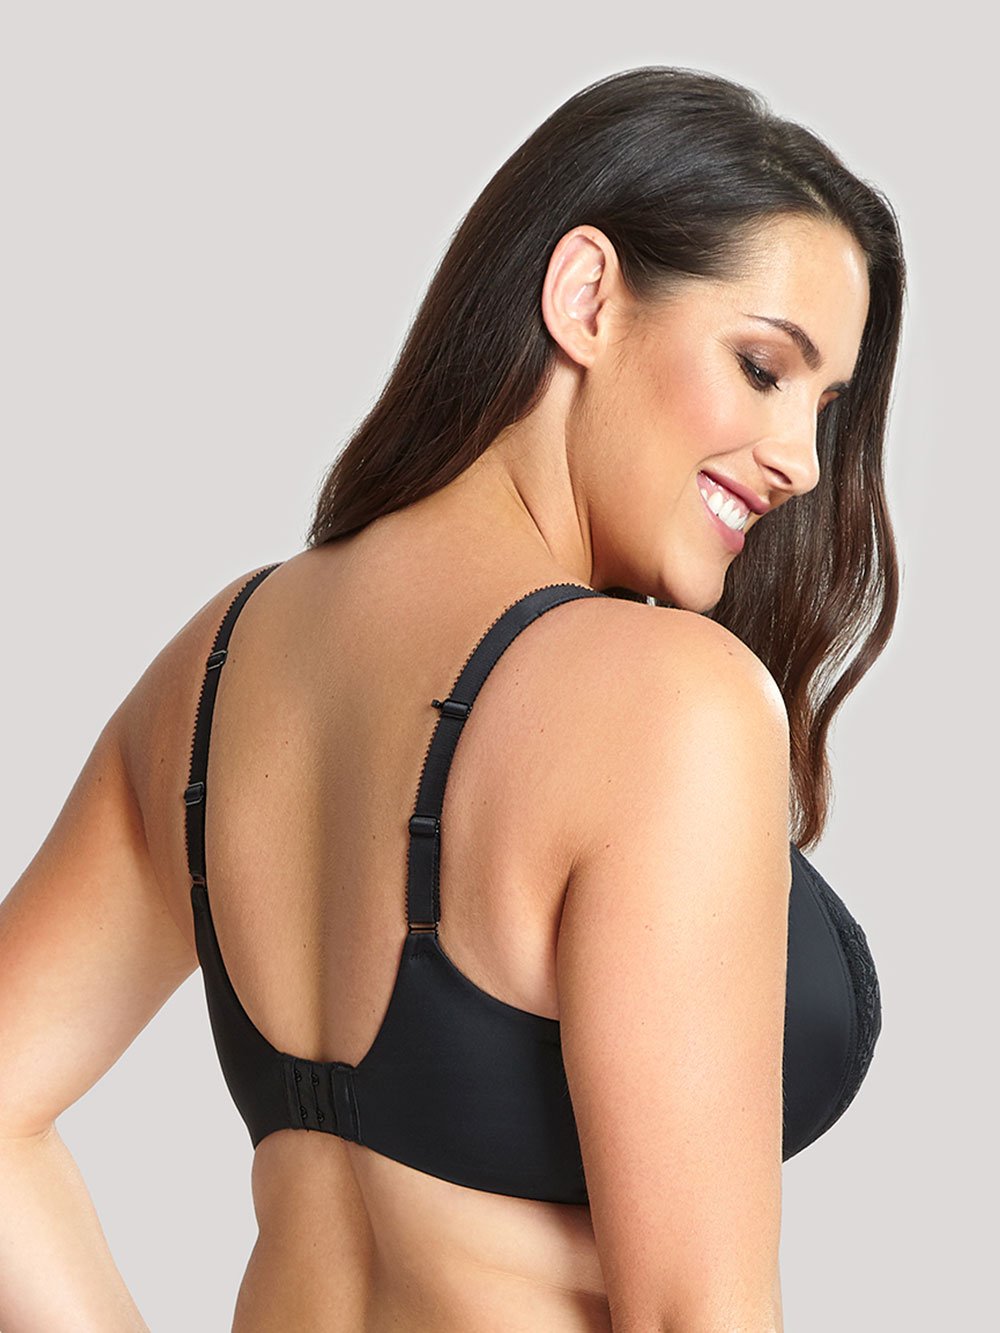 Panache Lingerie - The Andorra Full Cup Bra is every fuller busted